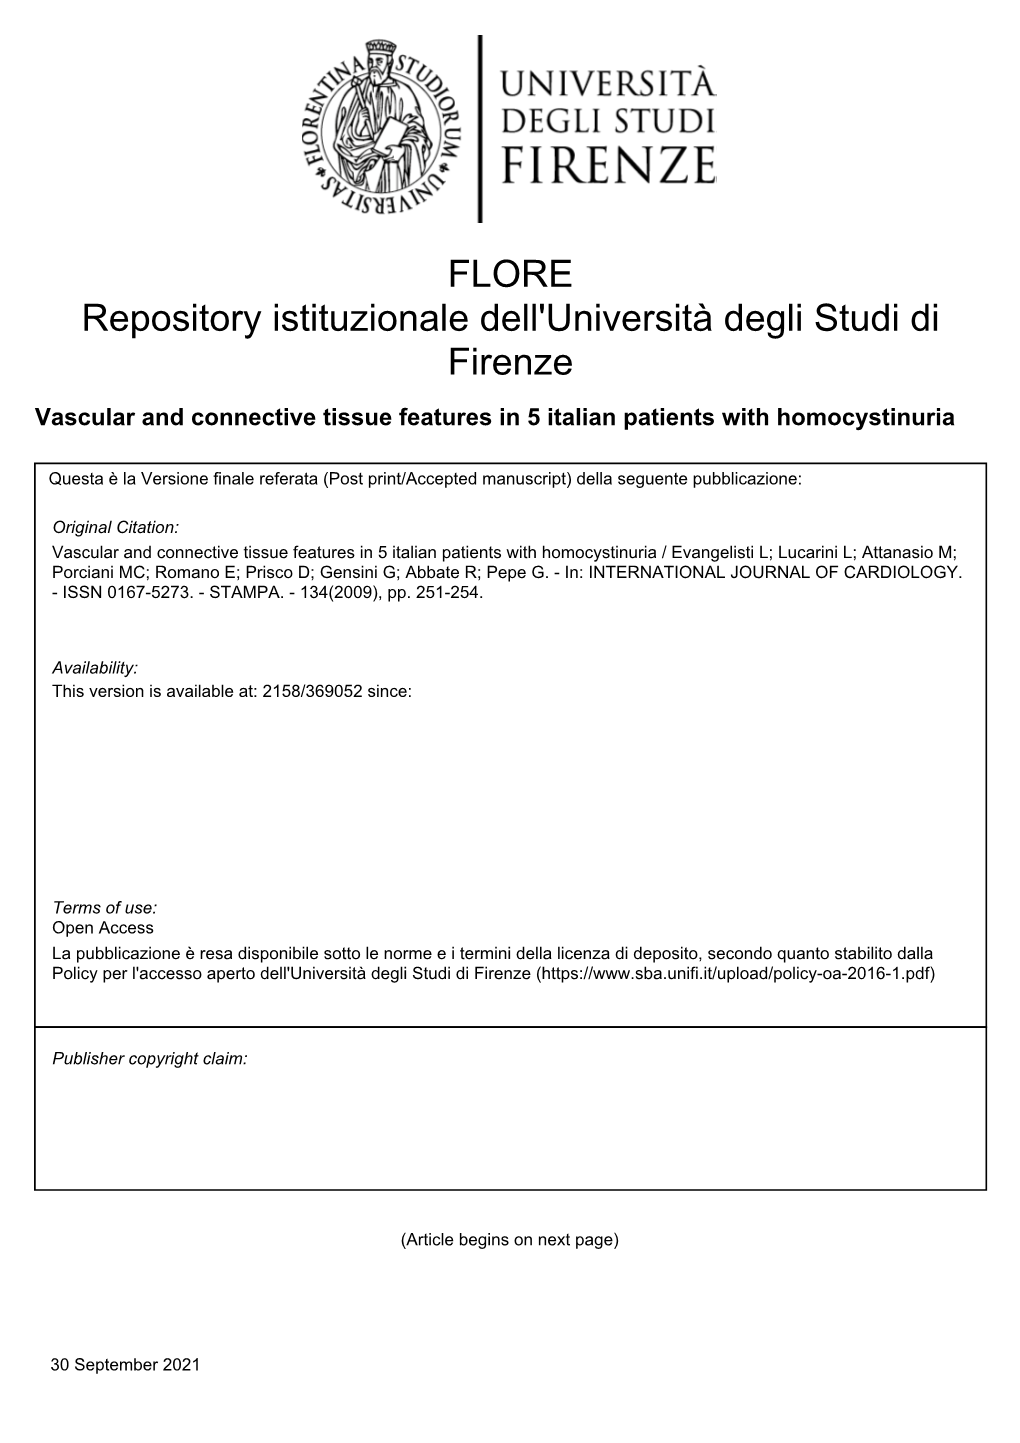 Vascular and Connective Tissue Features in 5 Italian Patients with Homocystinuria